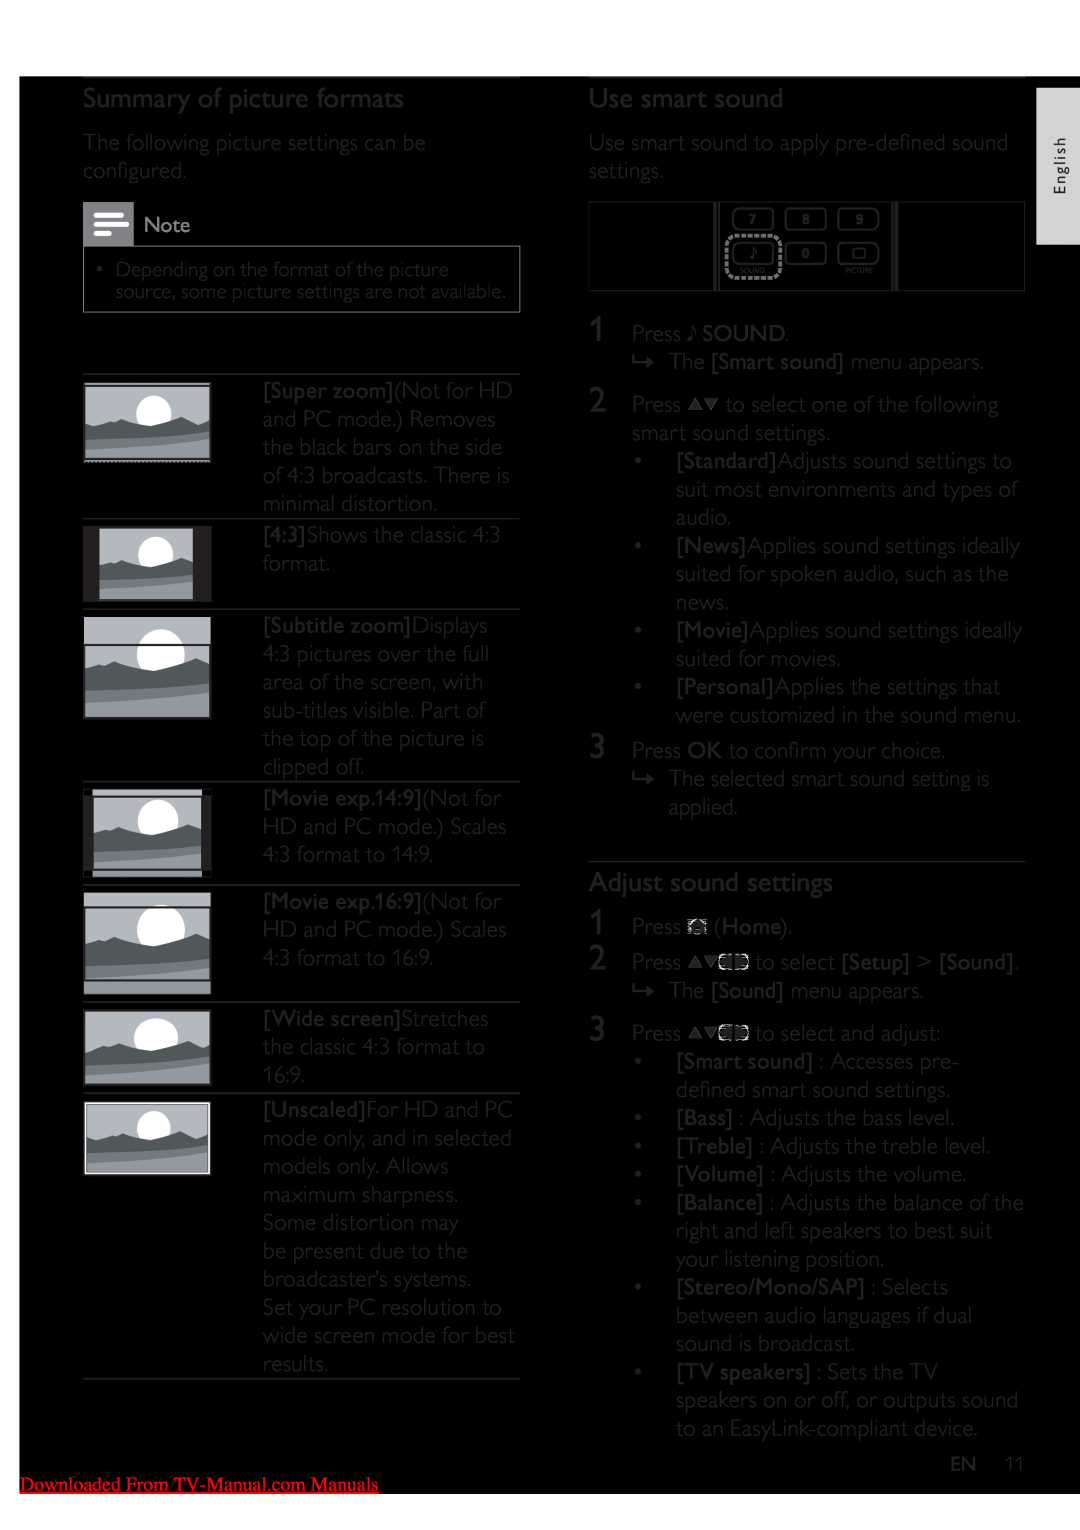 Philips 32PFL5604/78, 42PFL5604/78, 42PFL5604/77 Summary of picture formats, Use smart sound, Adjust sound settings 